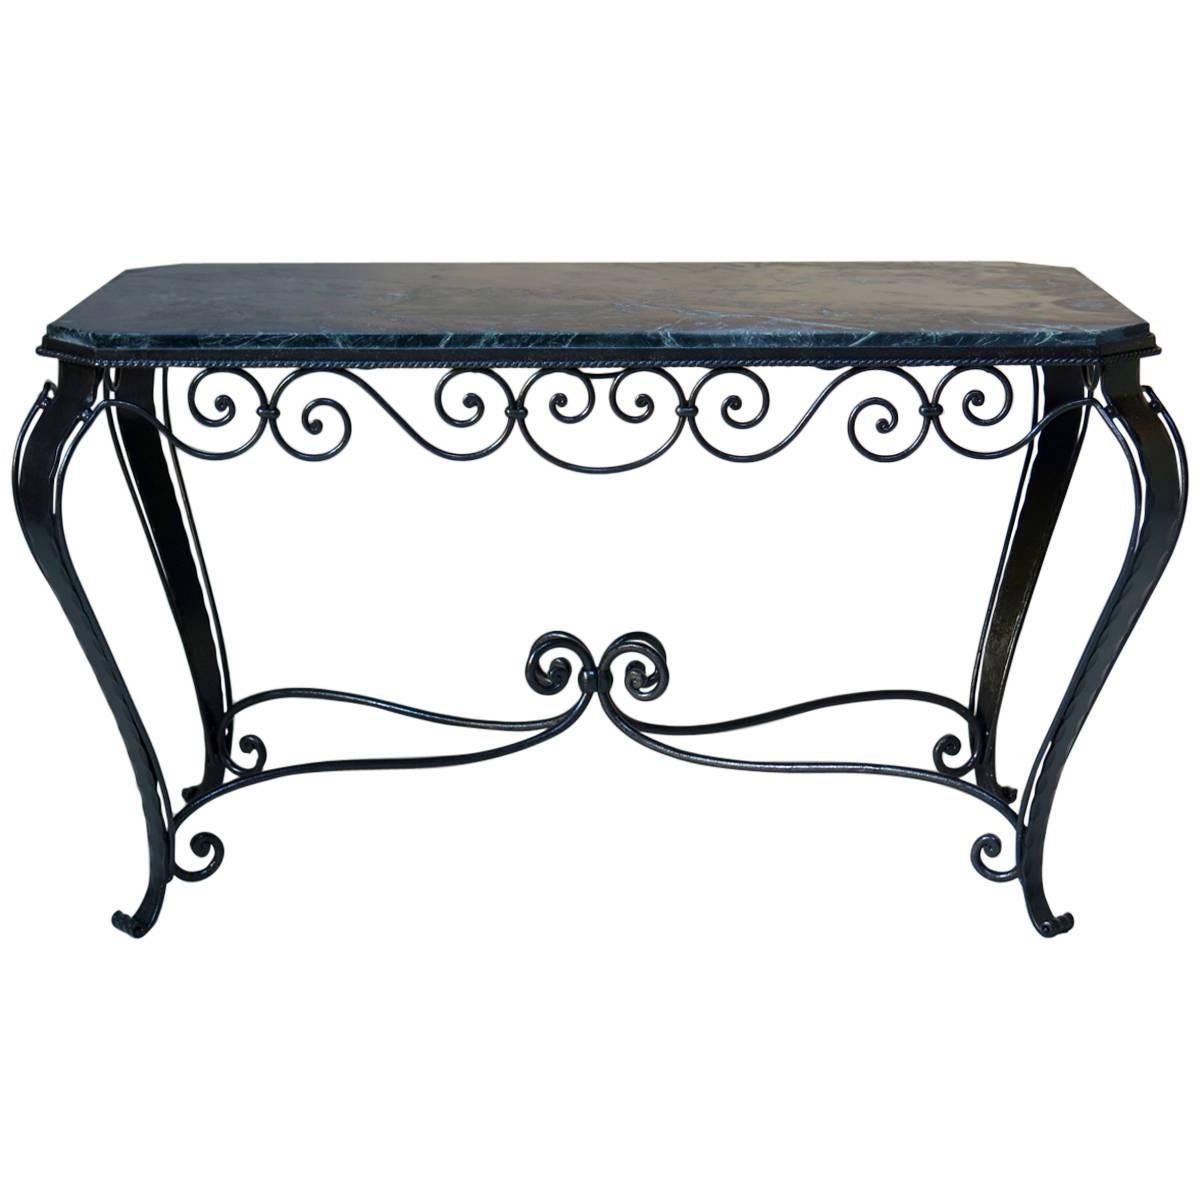 French Art Deco Wrought Iron and Marble Coffee Table, 1940s For Sale